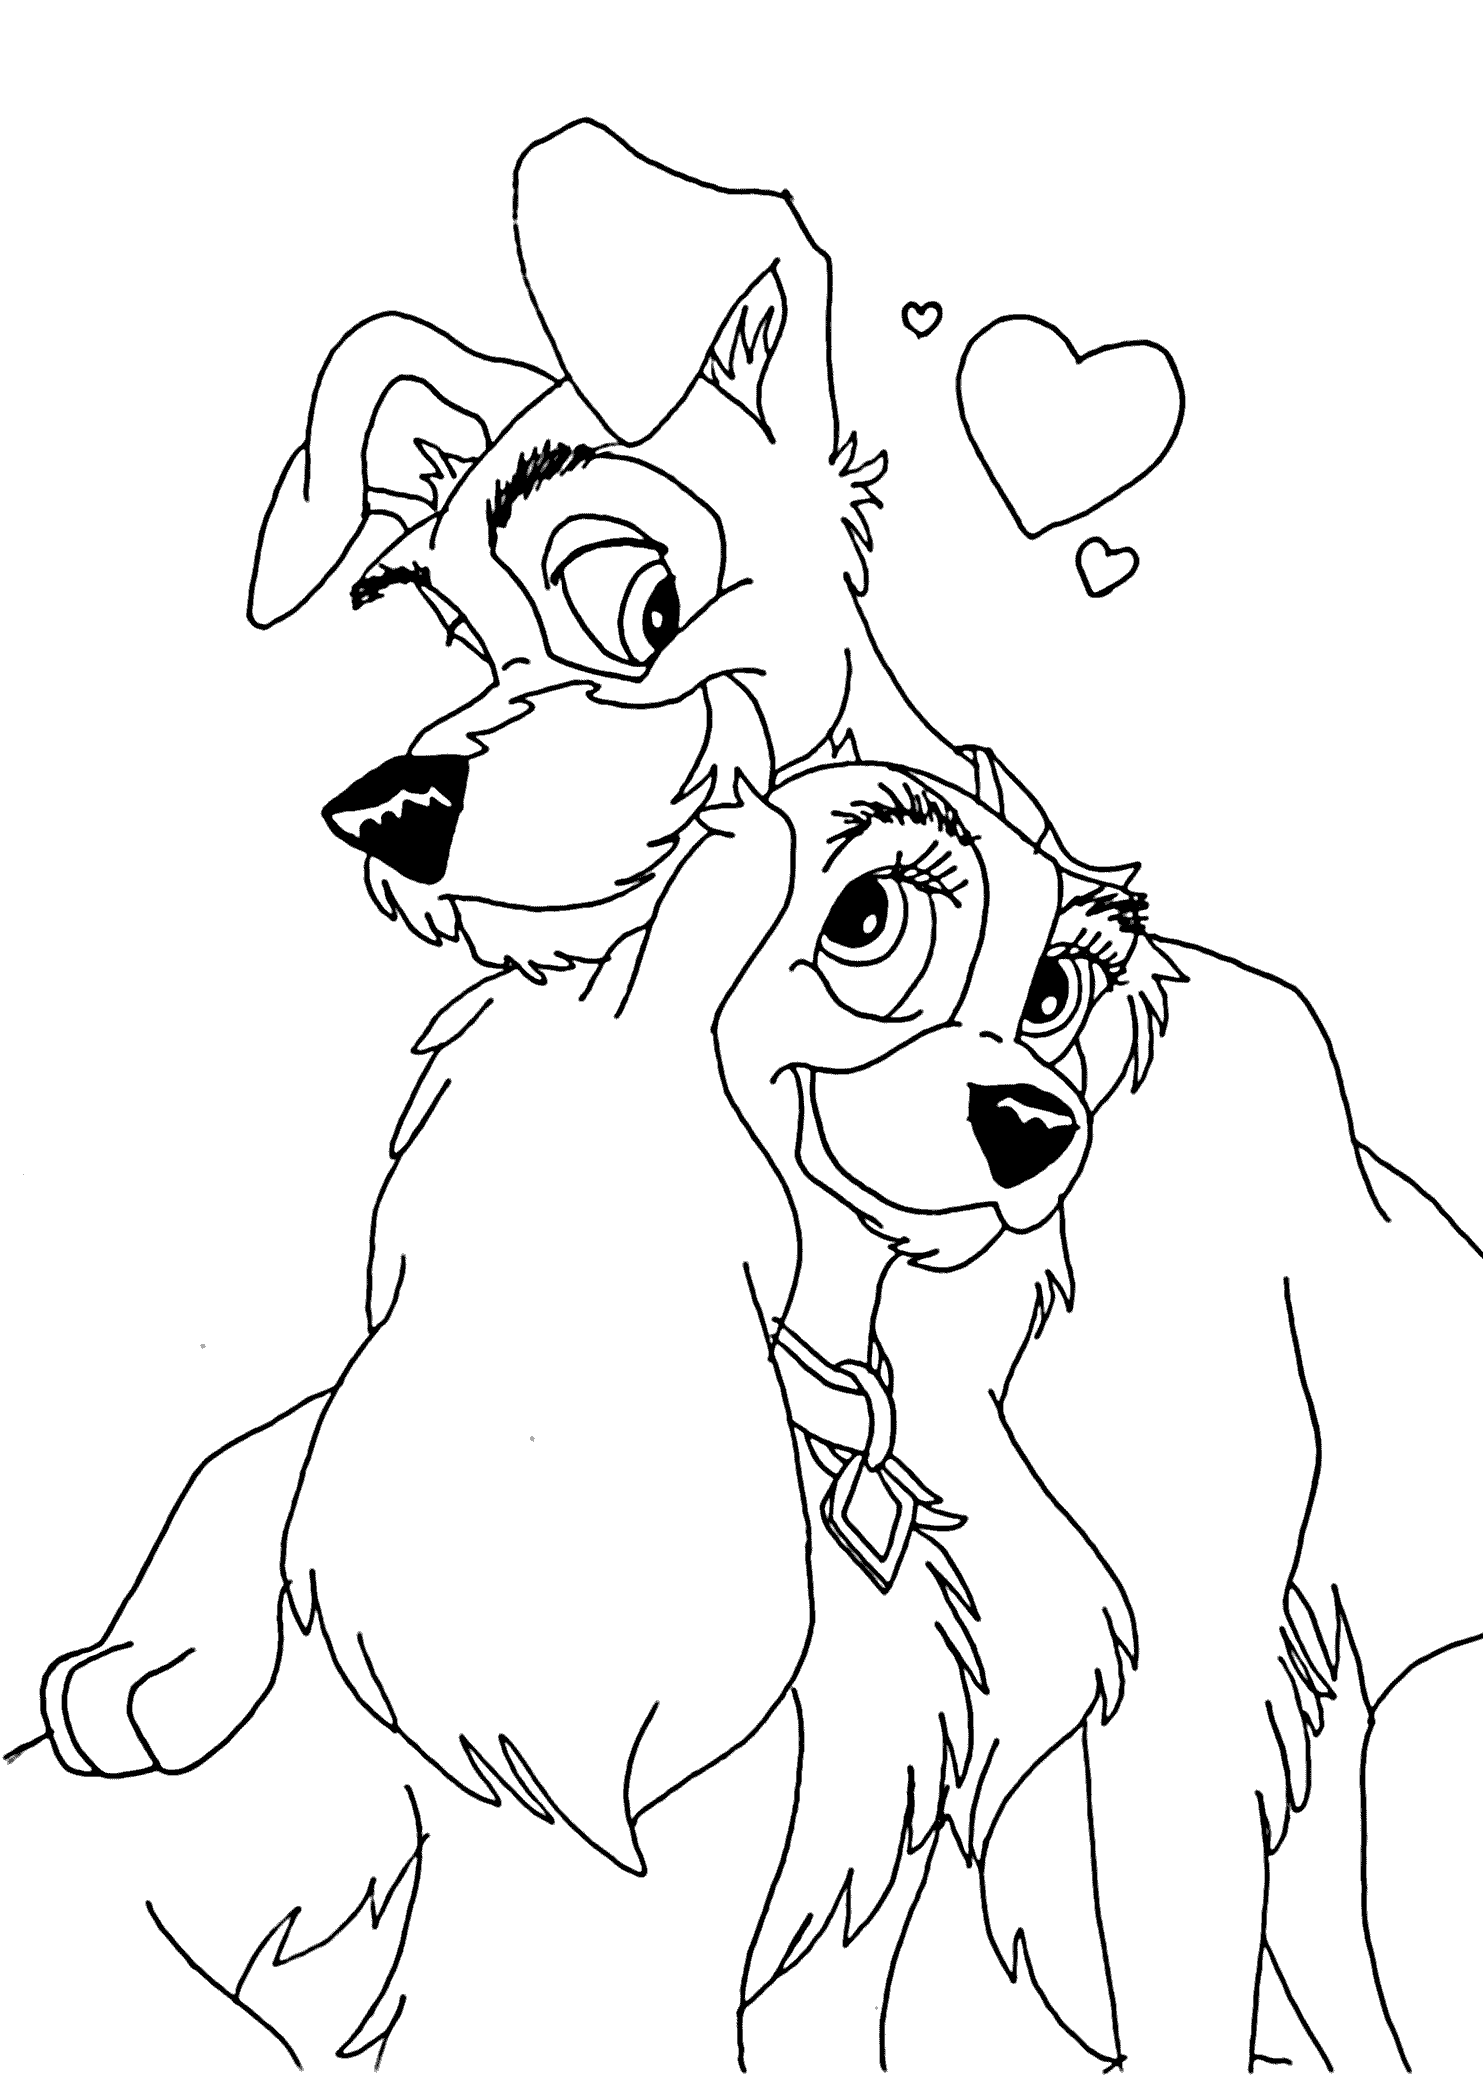 lady and the tramp coloring page lady and the tramp coloring pages disneyclipscom the and coloring page tramp lady 